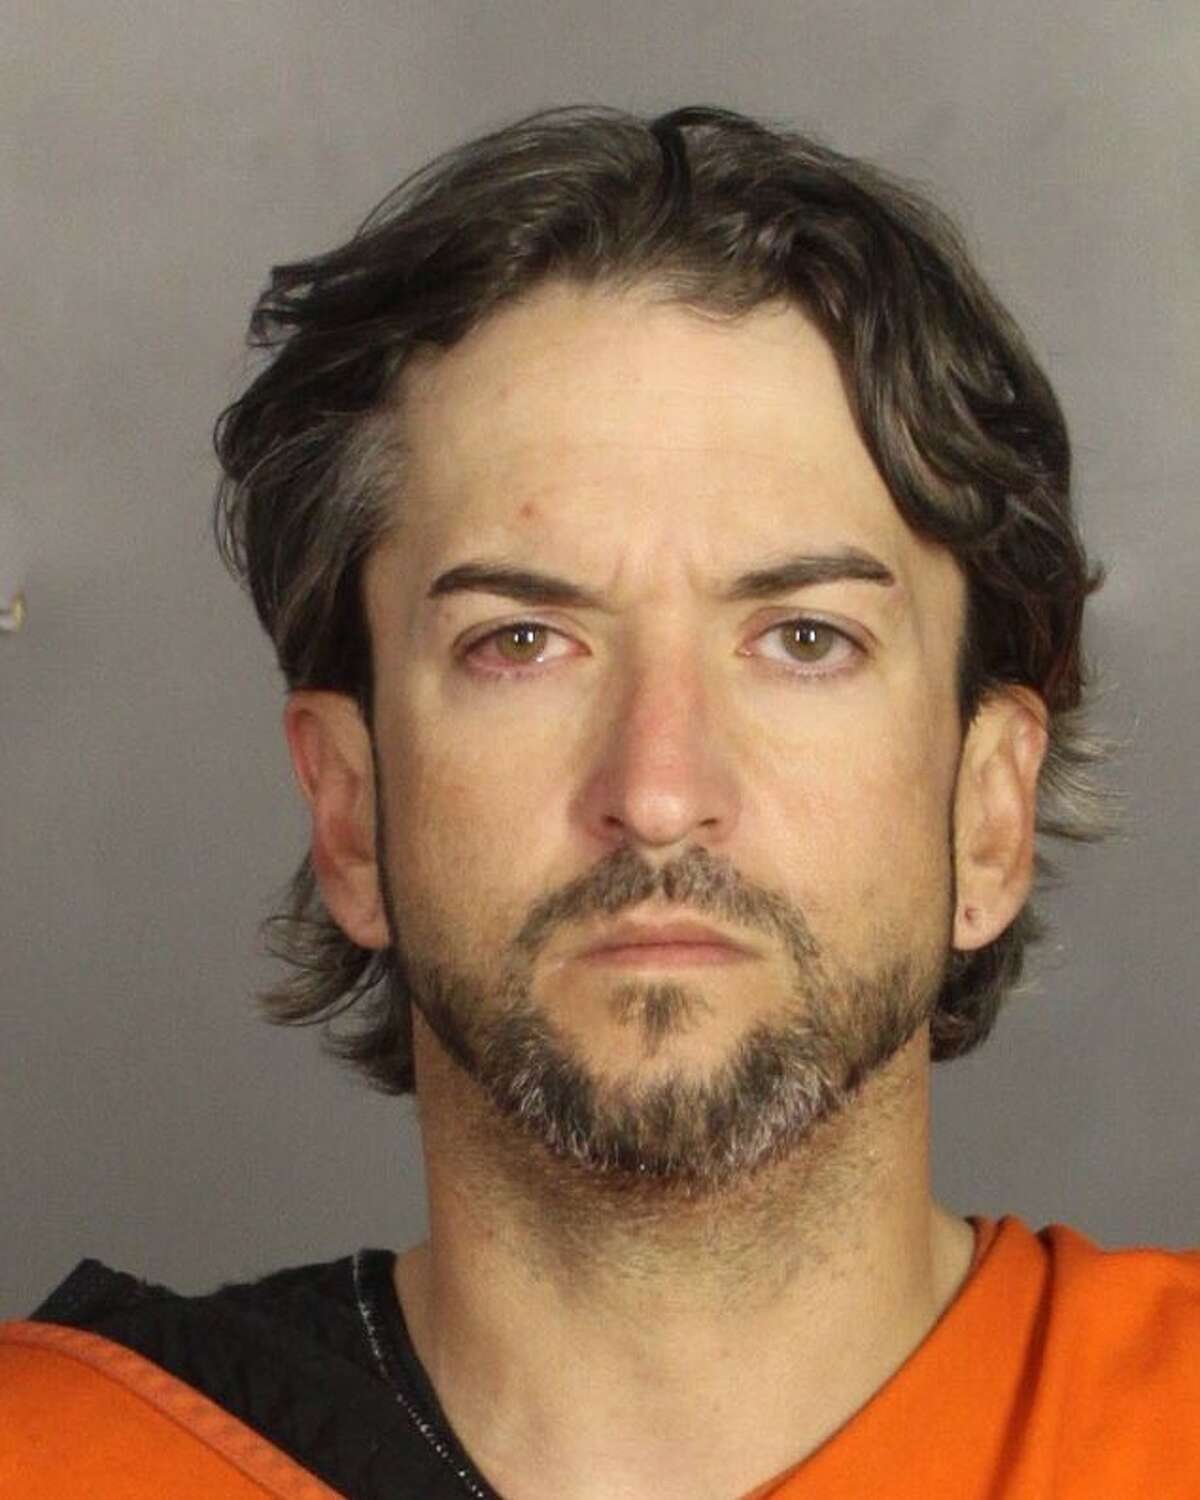 Marcus Pilkington, 37, was booked and charged with engaging in organized criminal activity in connection to a shooting involving motorcycle gangs at a Twin Peaks restaurant in Waco at around noon on May 17, 2015. The shooting left nine dead and 18 injured.